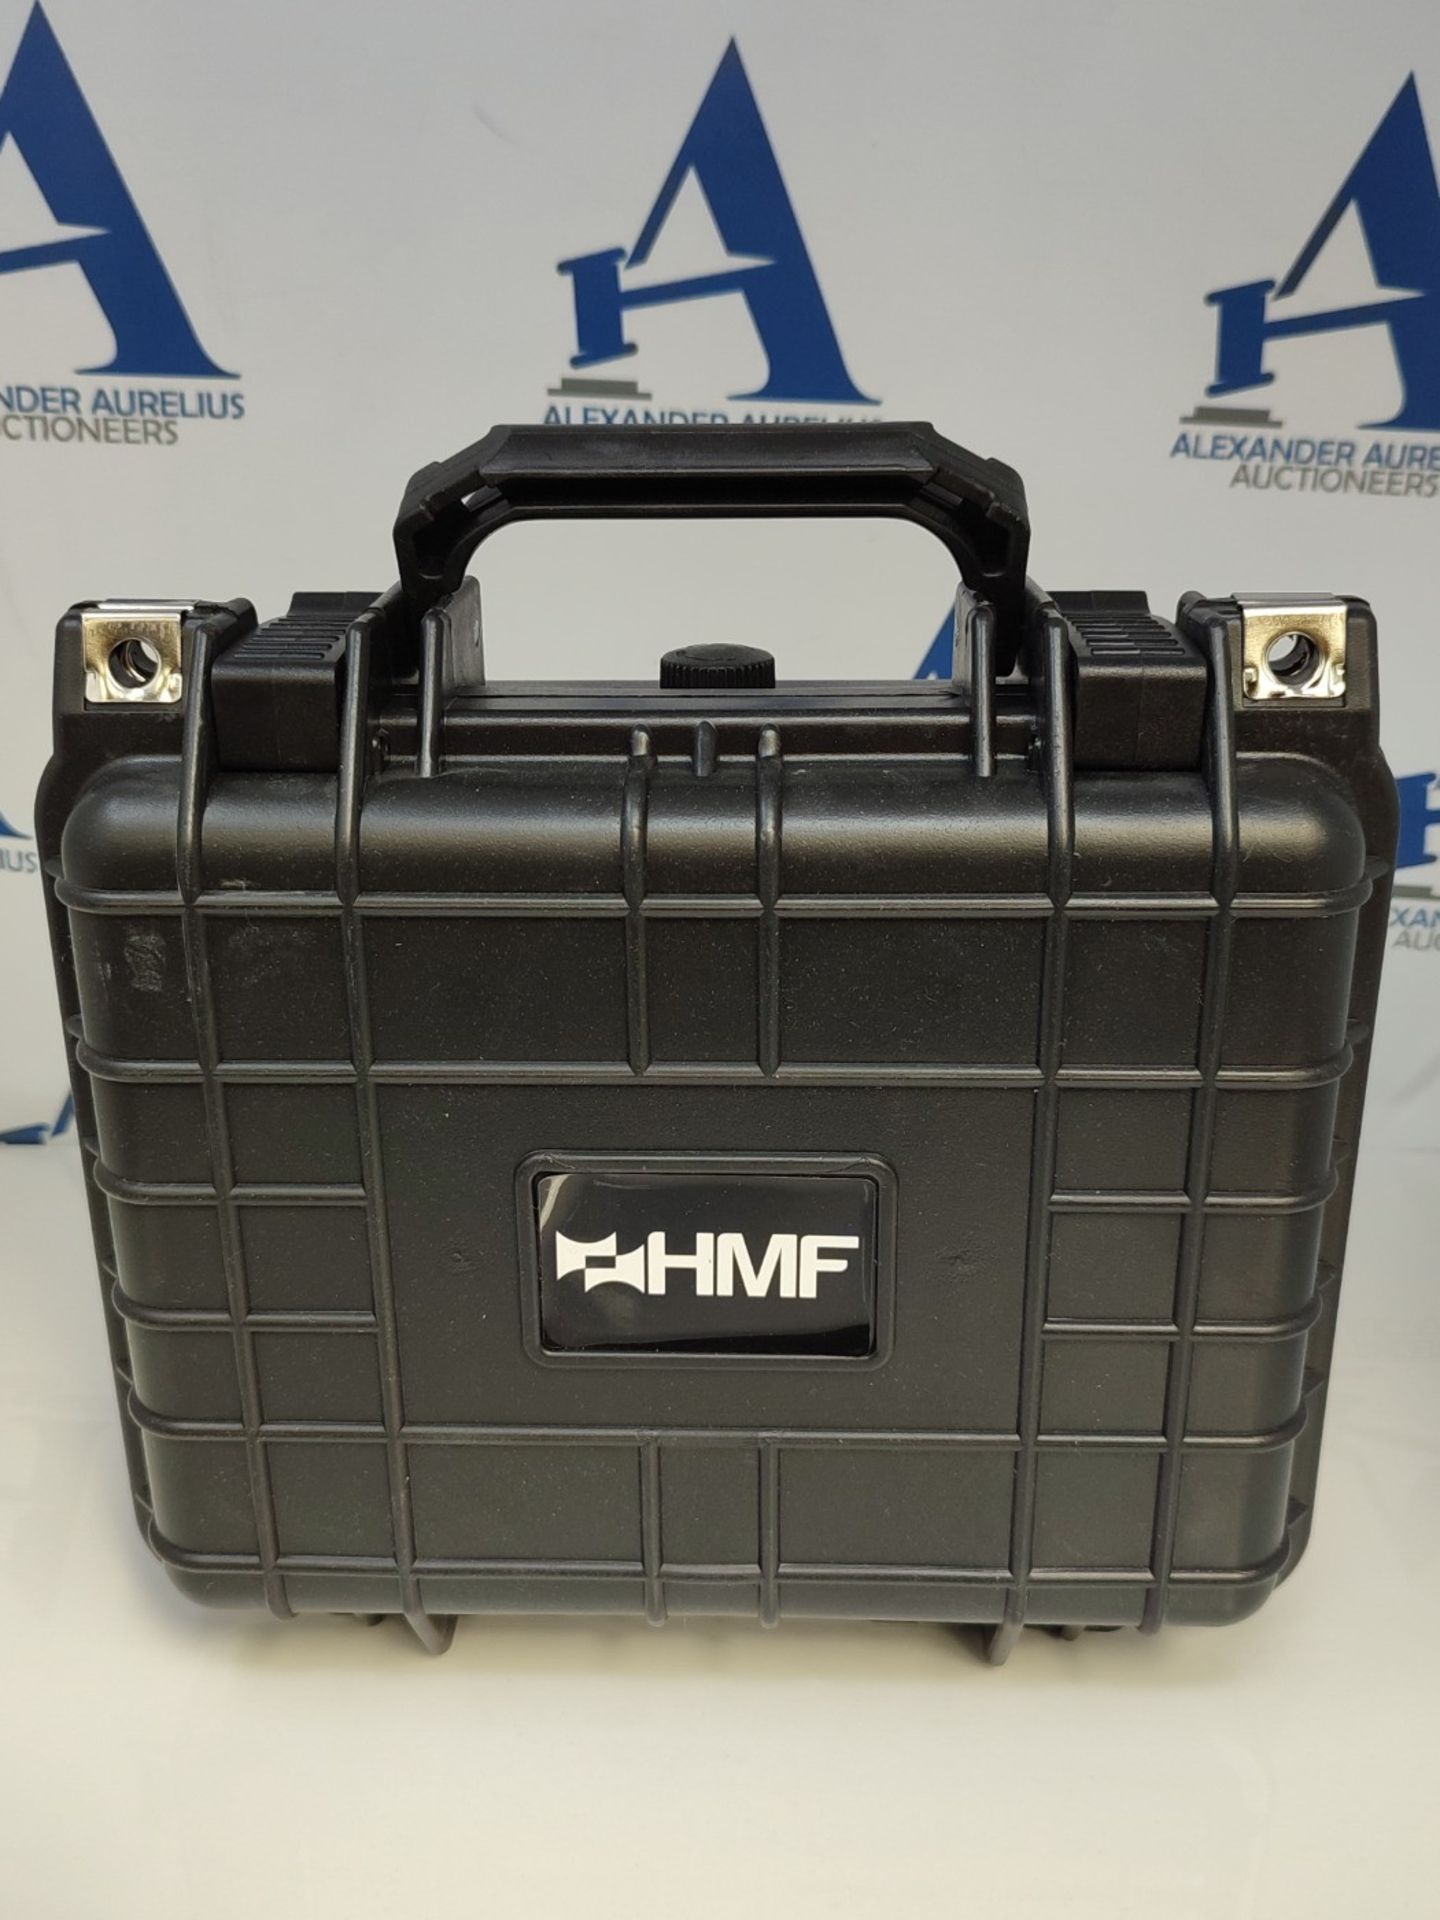 HMF ODK100 Outdoor Photo Case, Transport Case with Grid Foam | 27 x 24.5 x 13 cm - Image 3 of 4